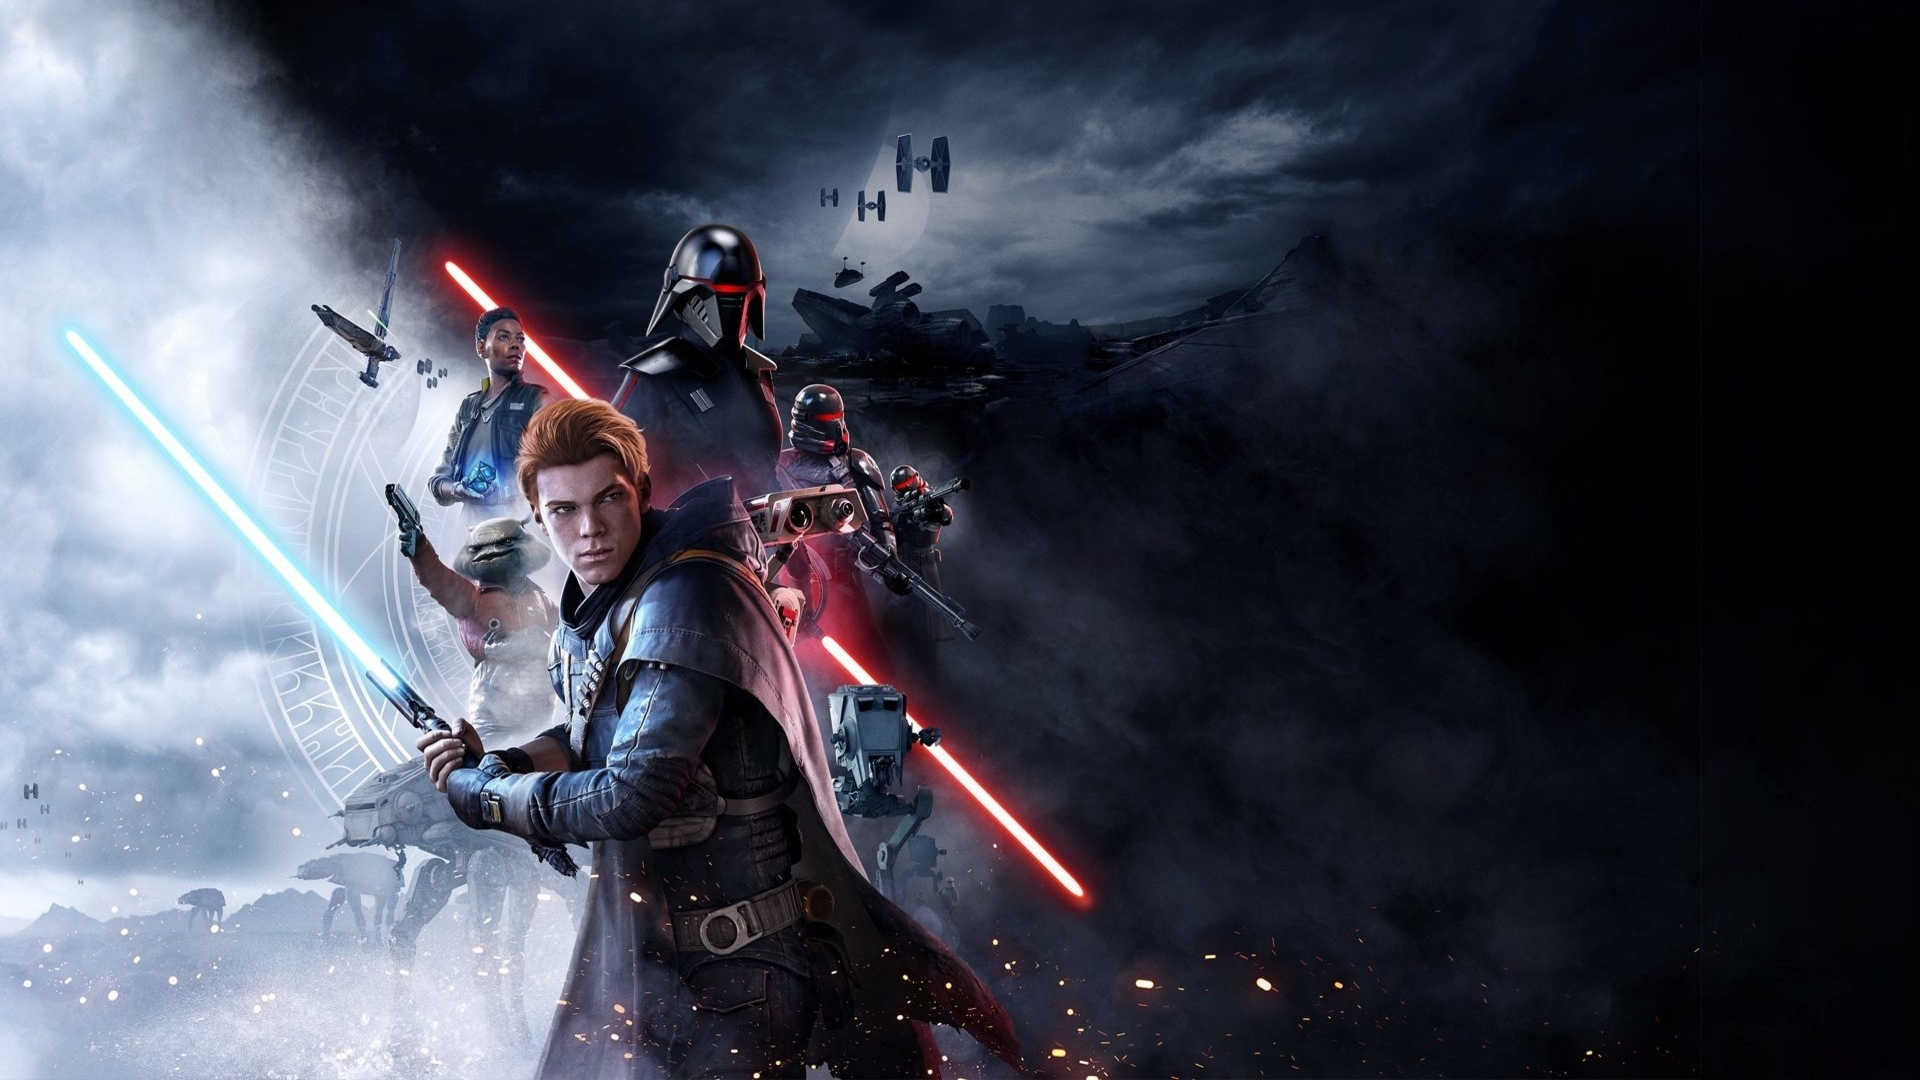 1920x1080 70+ Star Wars Jedi: Fallen Order HD Wallpapers and Backgrounds